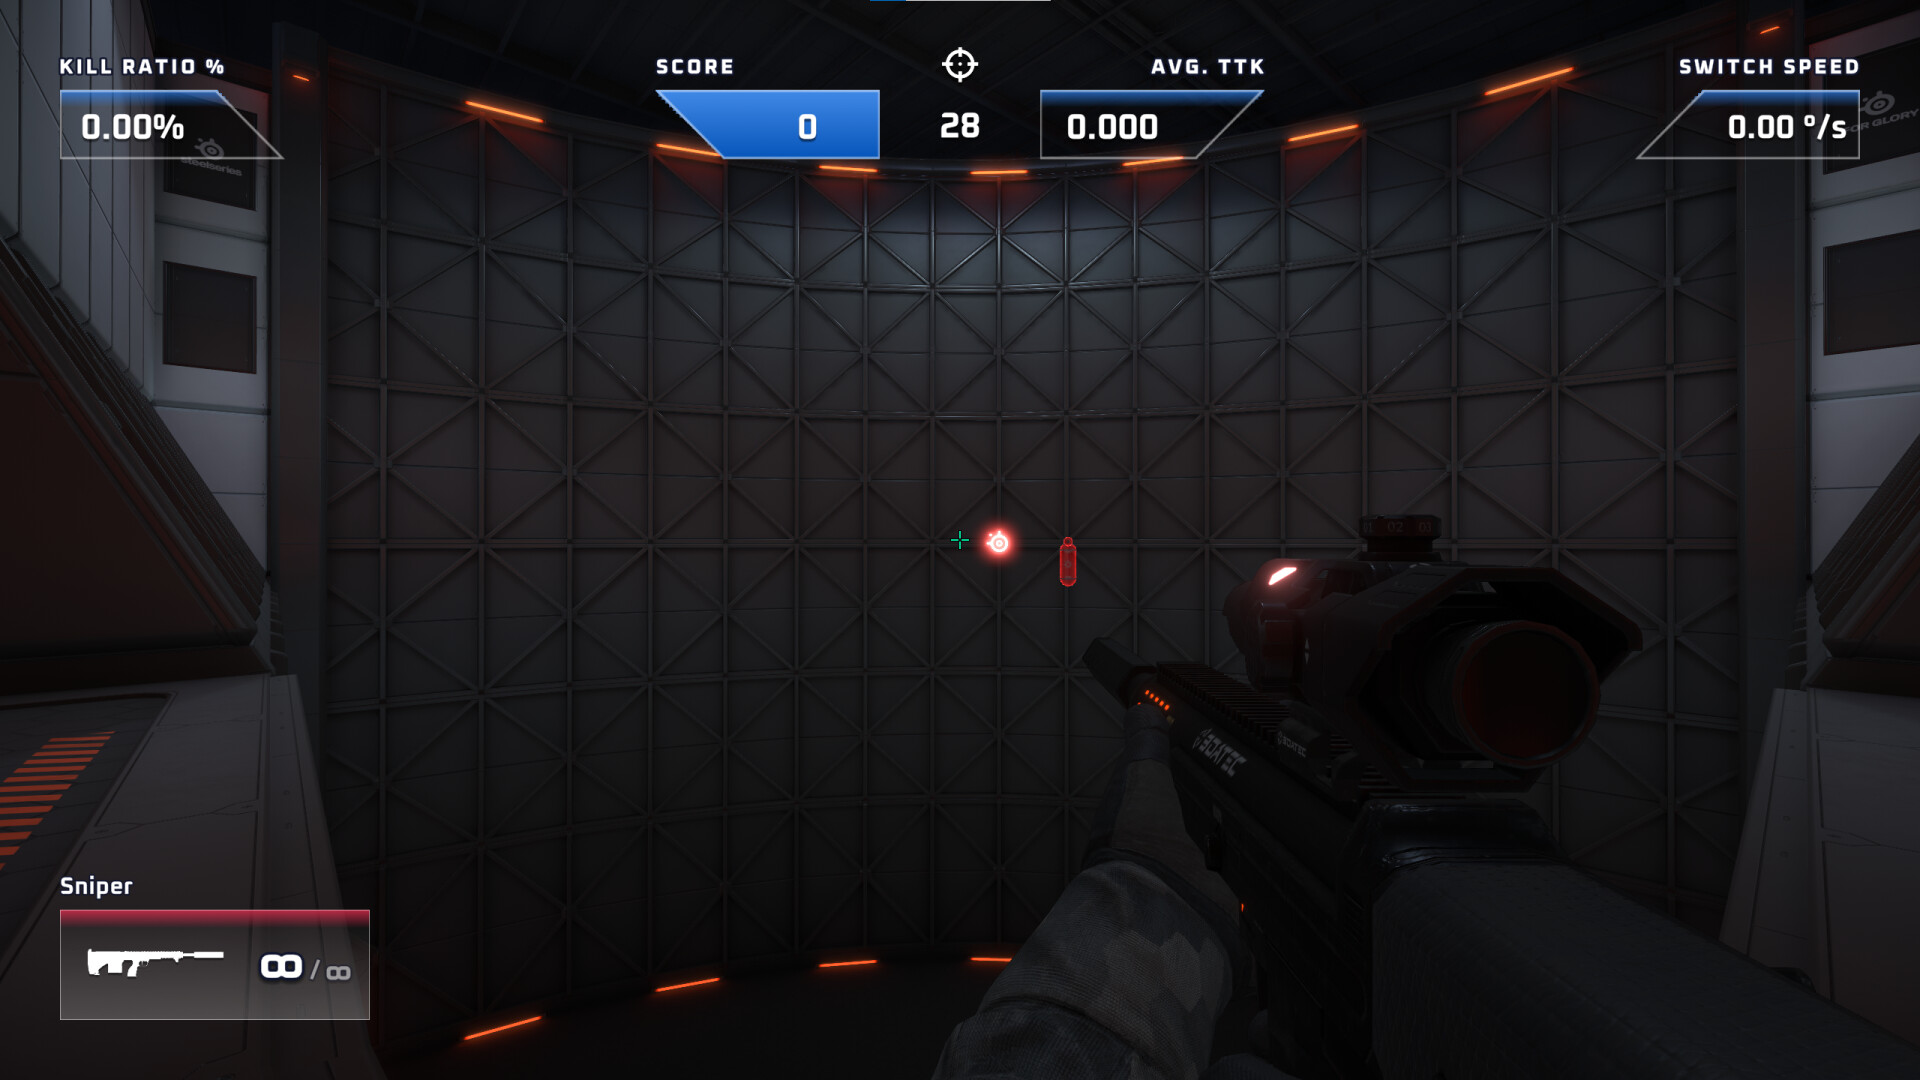 3D Aim Trainer - FPS Practice - APK Download for Android